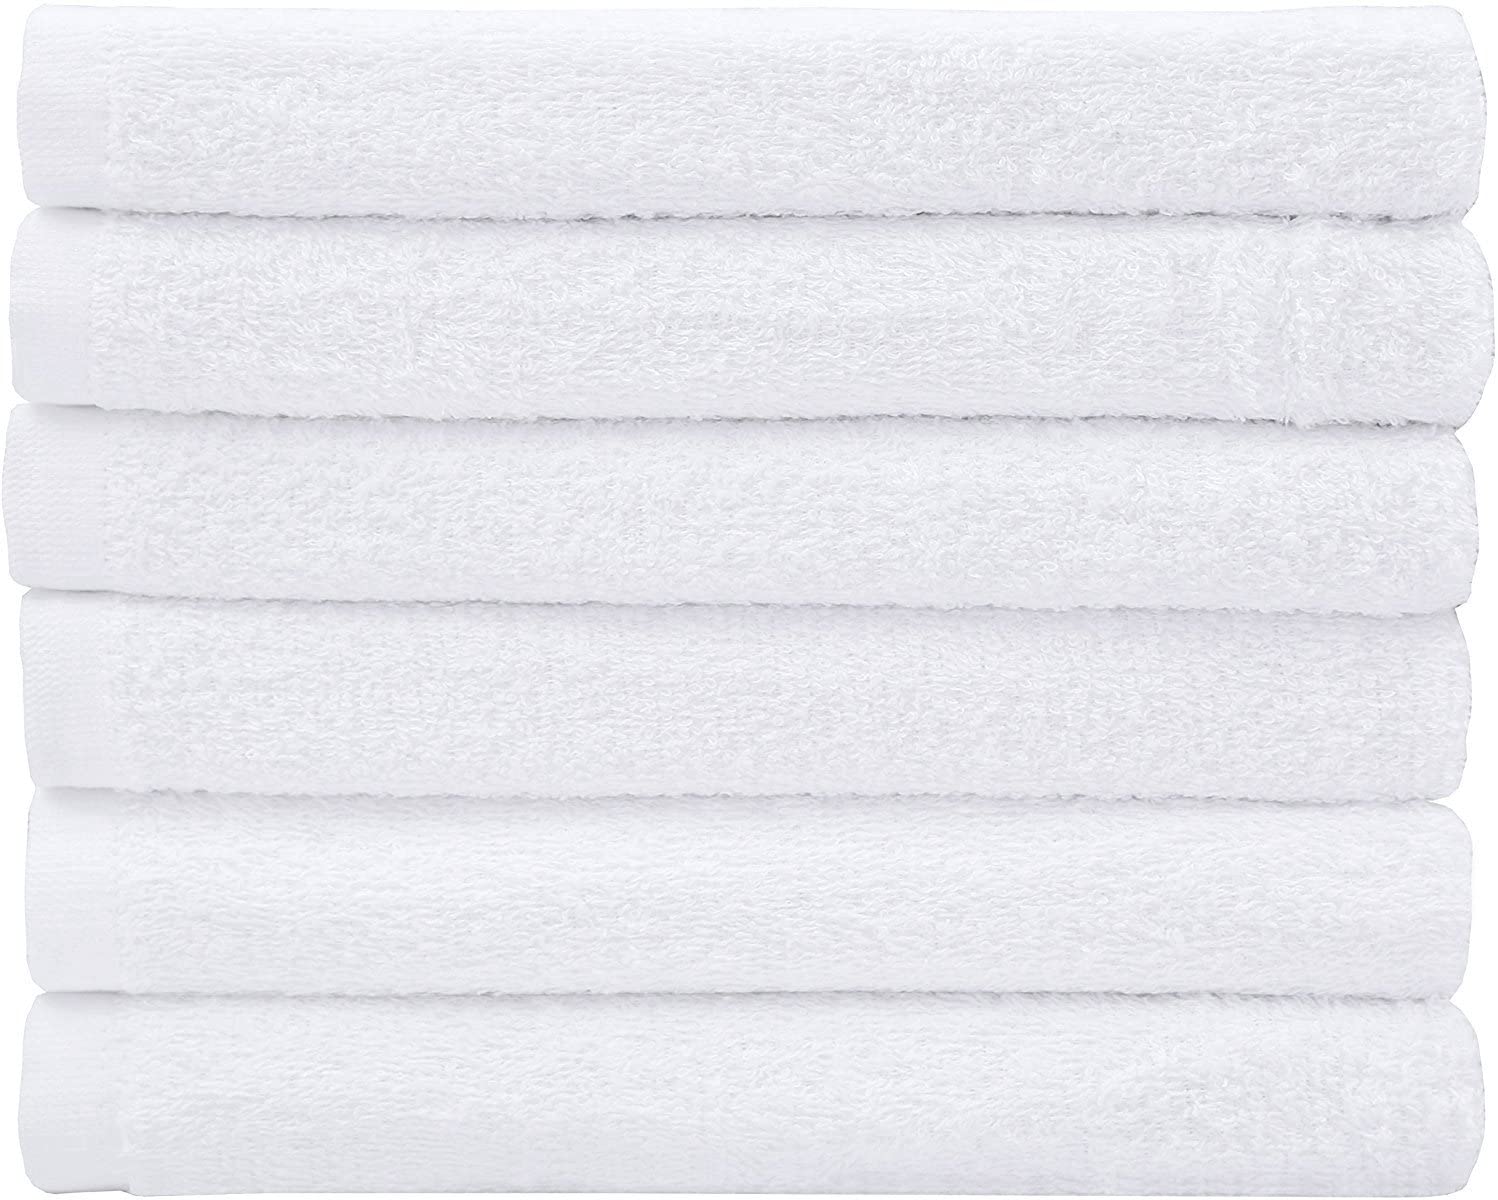 Utopia 24-Piece Cotton Washcloth Set - 30x30 cm White - 100% Ring Spun Cotton Flannel Face Towels, Highly Absorbent and Soft Feel Fingertip Towels 7